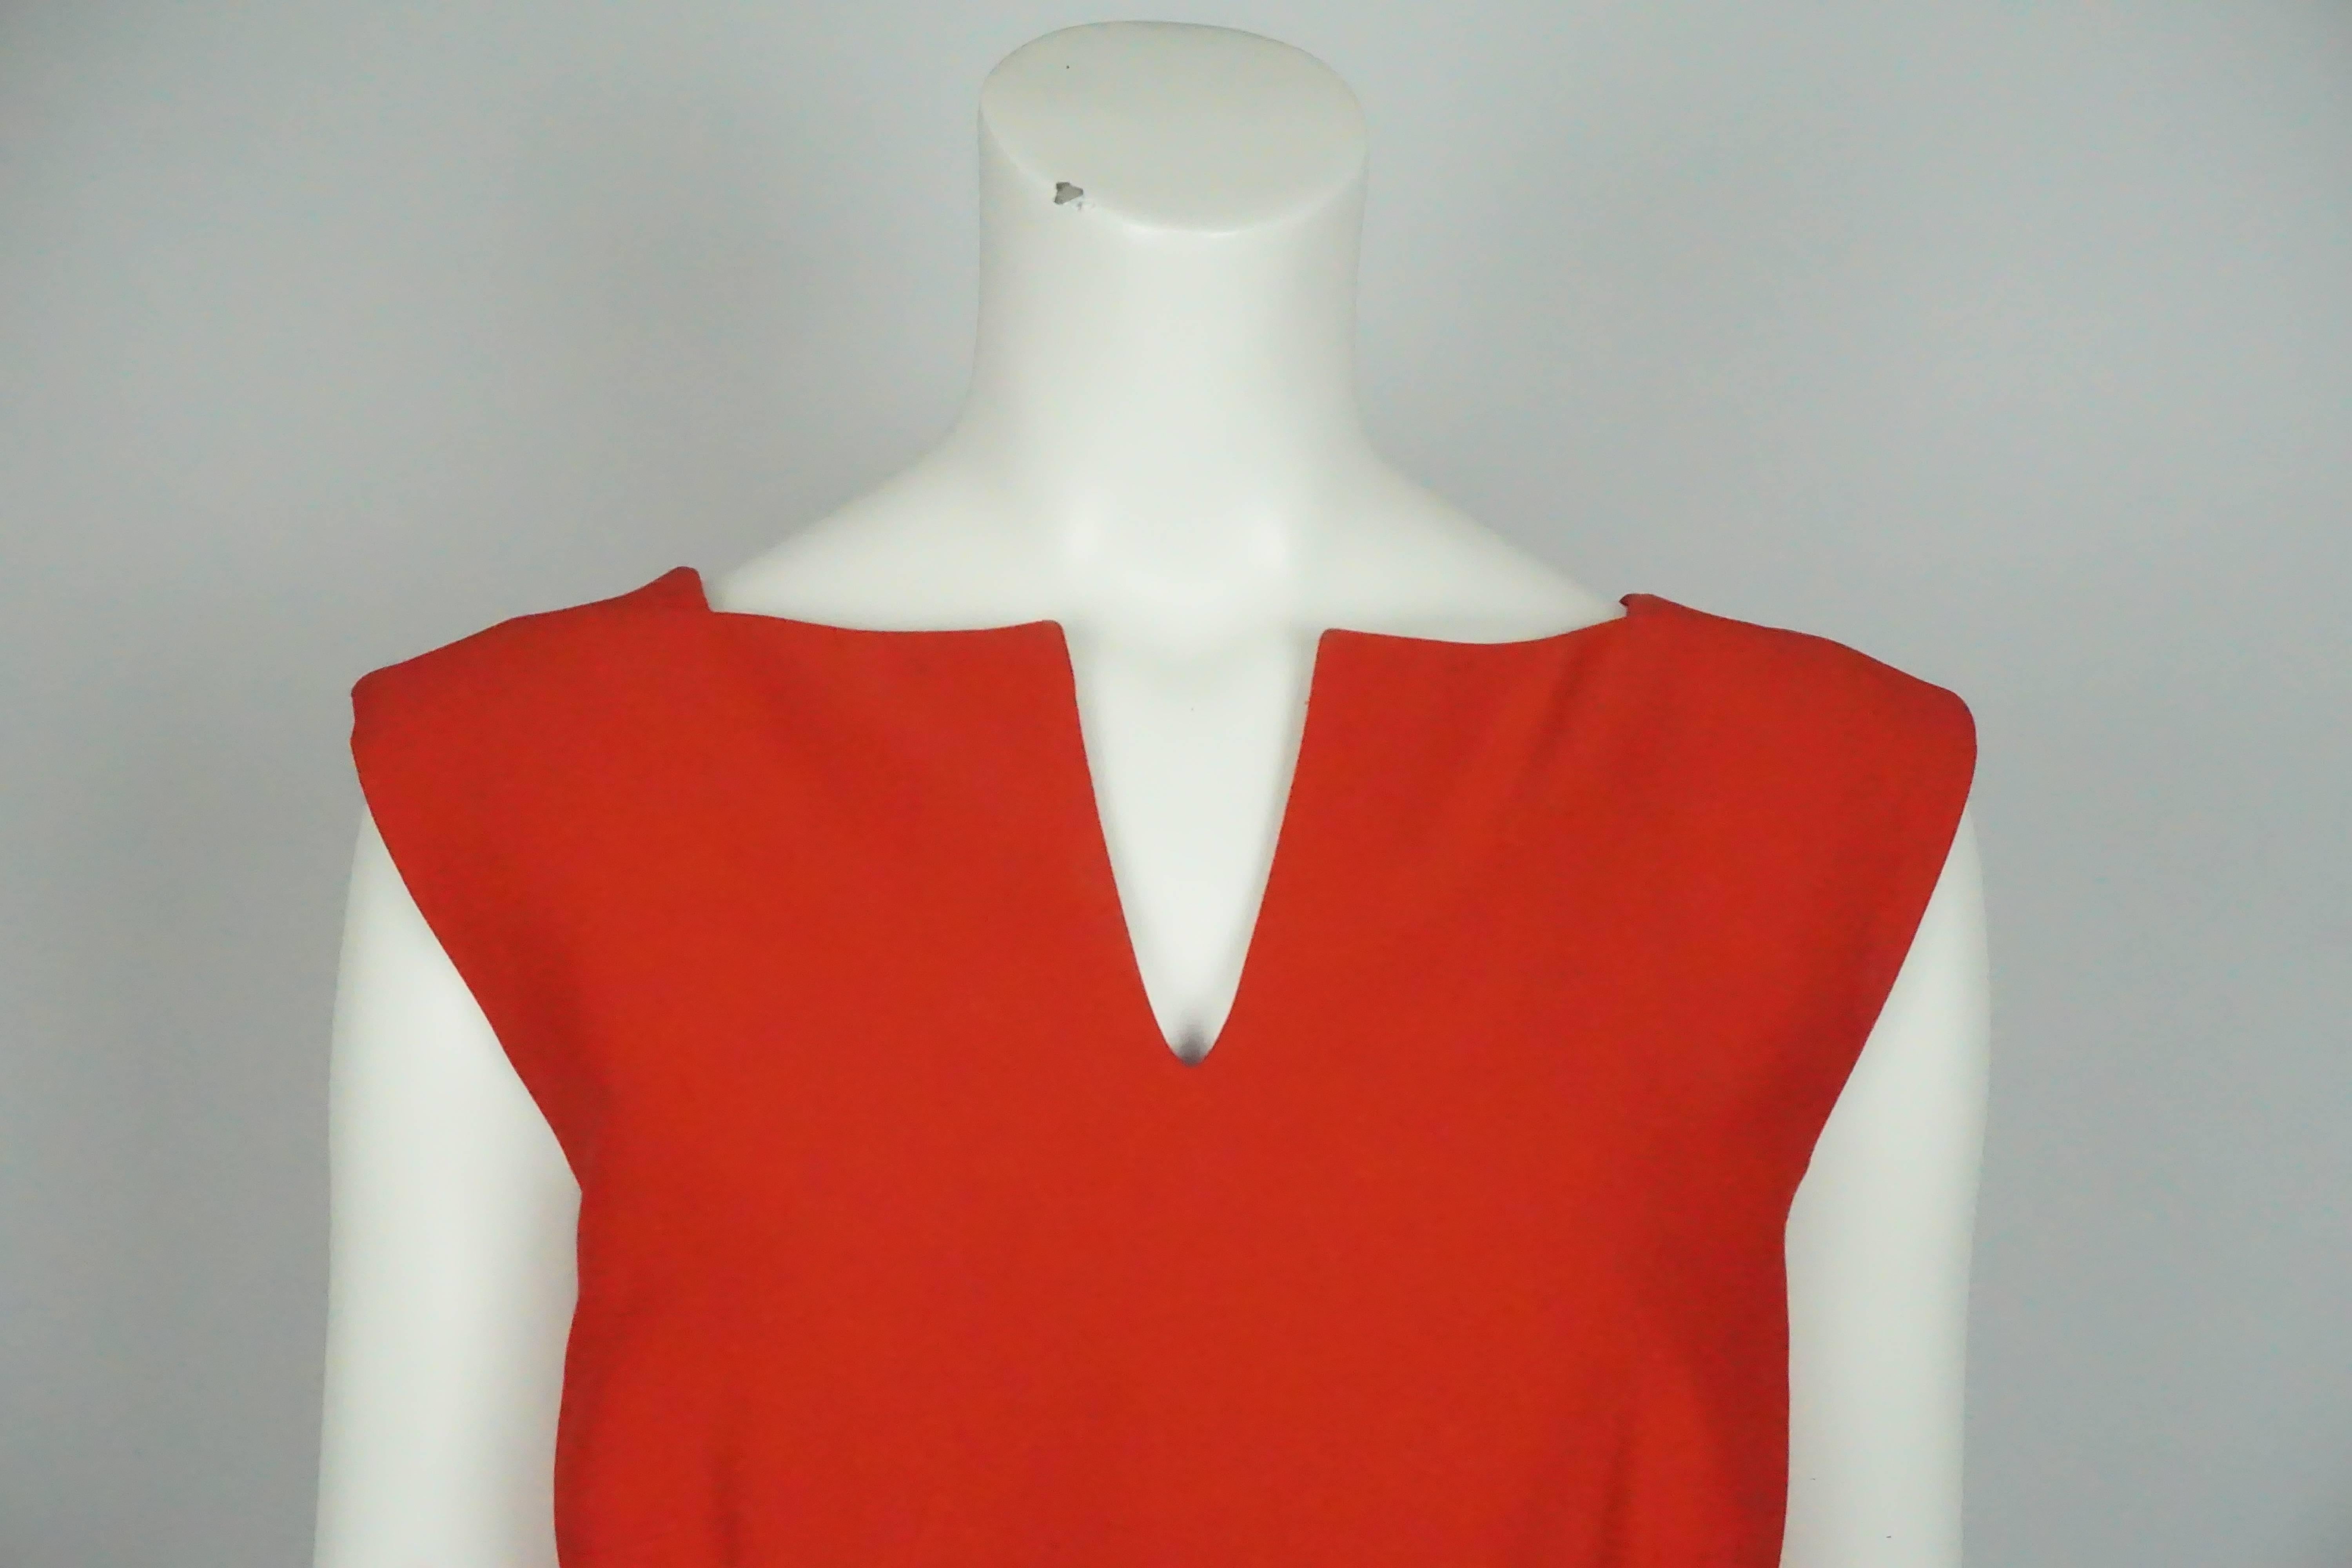 Alexander McQueen Red Sleeveless Sheath Dress - 44 In Good Condition For Sale In West Palm Beach, FL